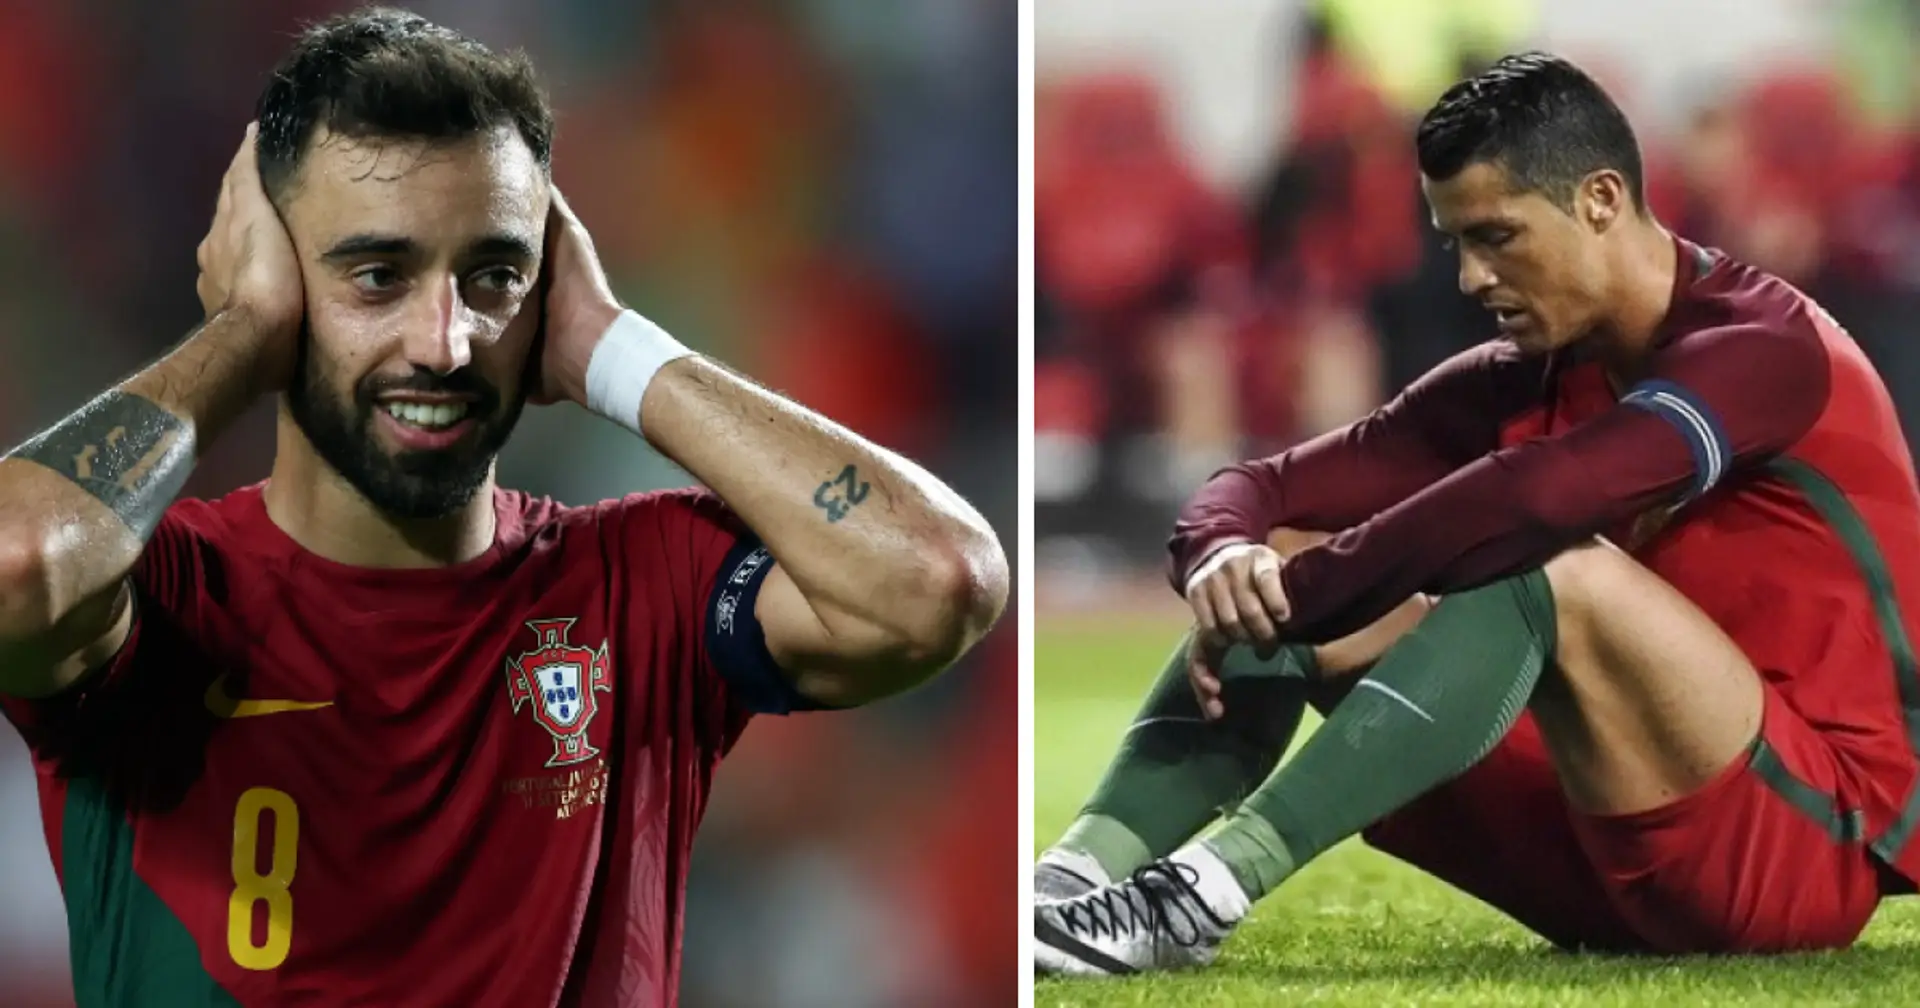 'Ronaldo is the problem': Fans react to Portugal beating Luxembourg 9-0 without Cristiano